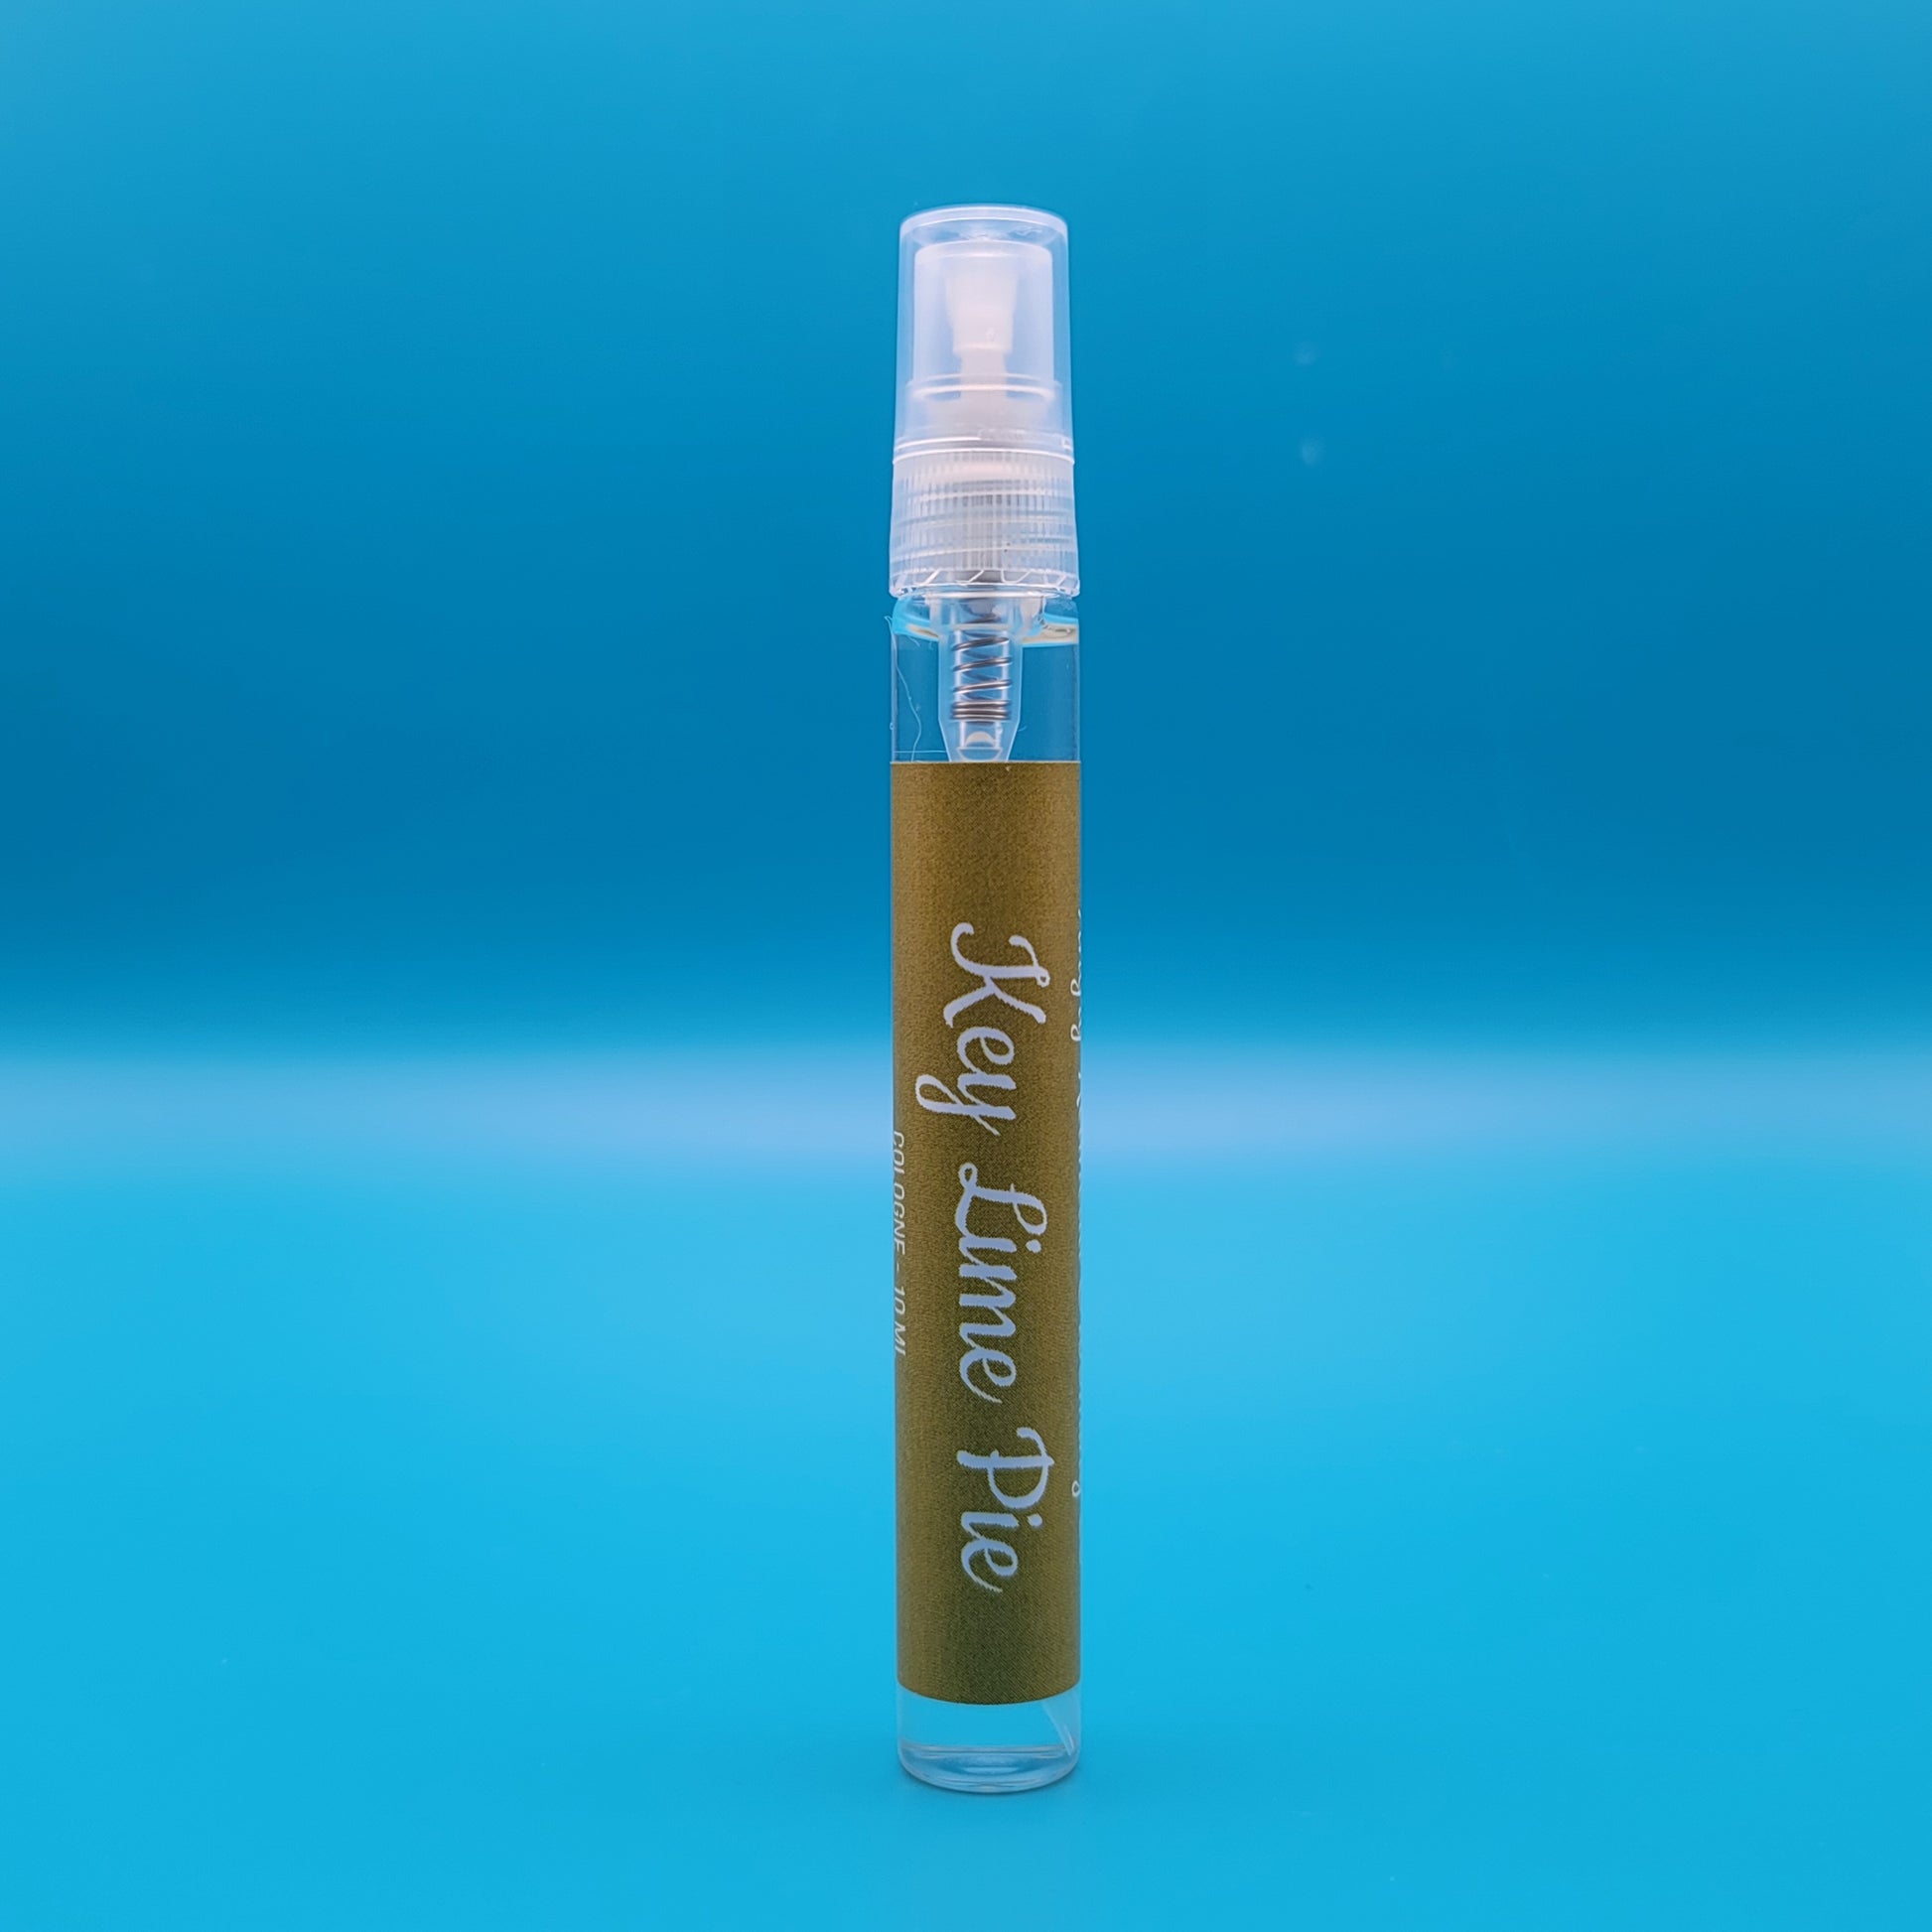 Key Lime Pie Body Mist by Angry Redhead Grooming Co - angryredheadgrooming.com